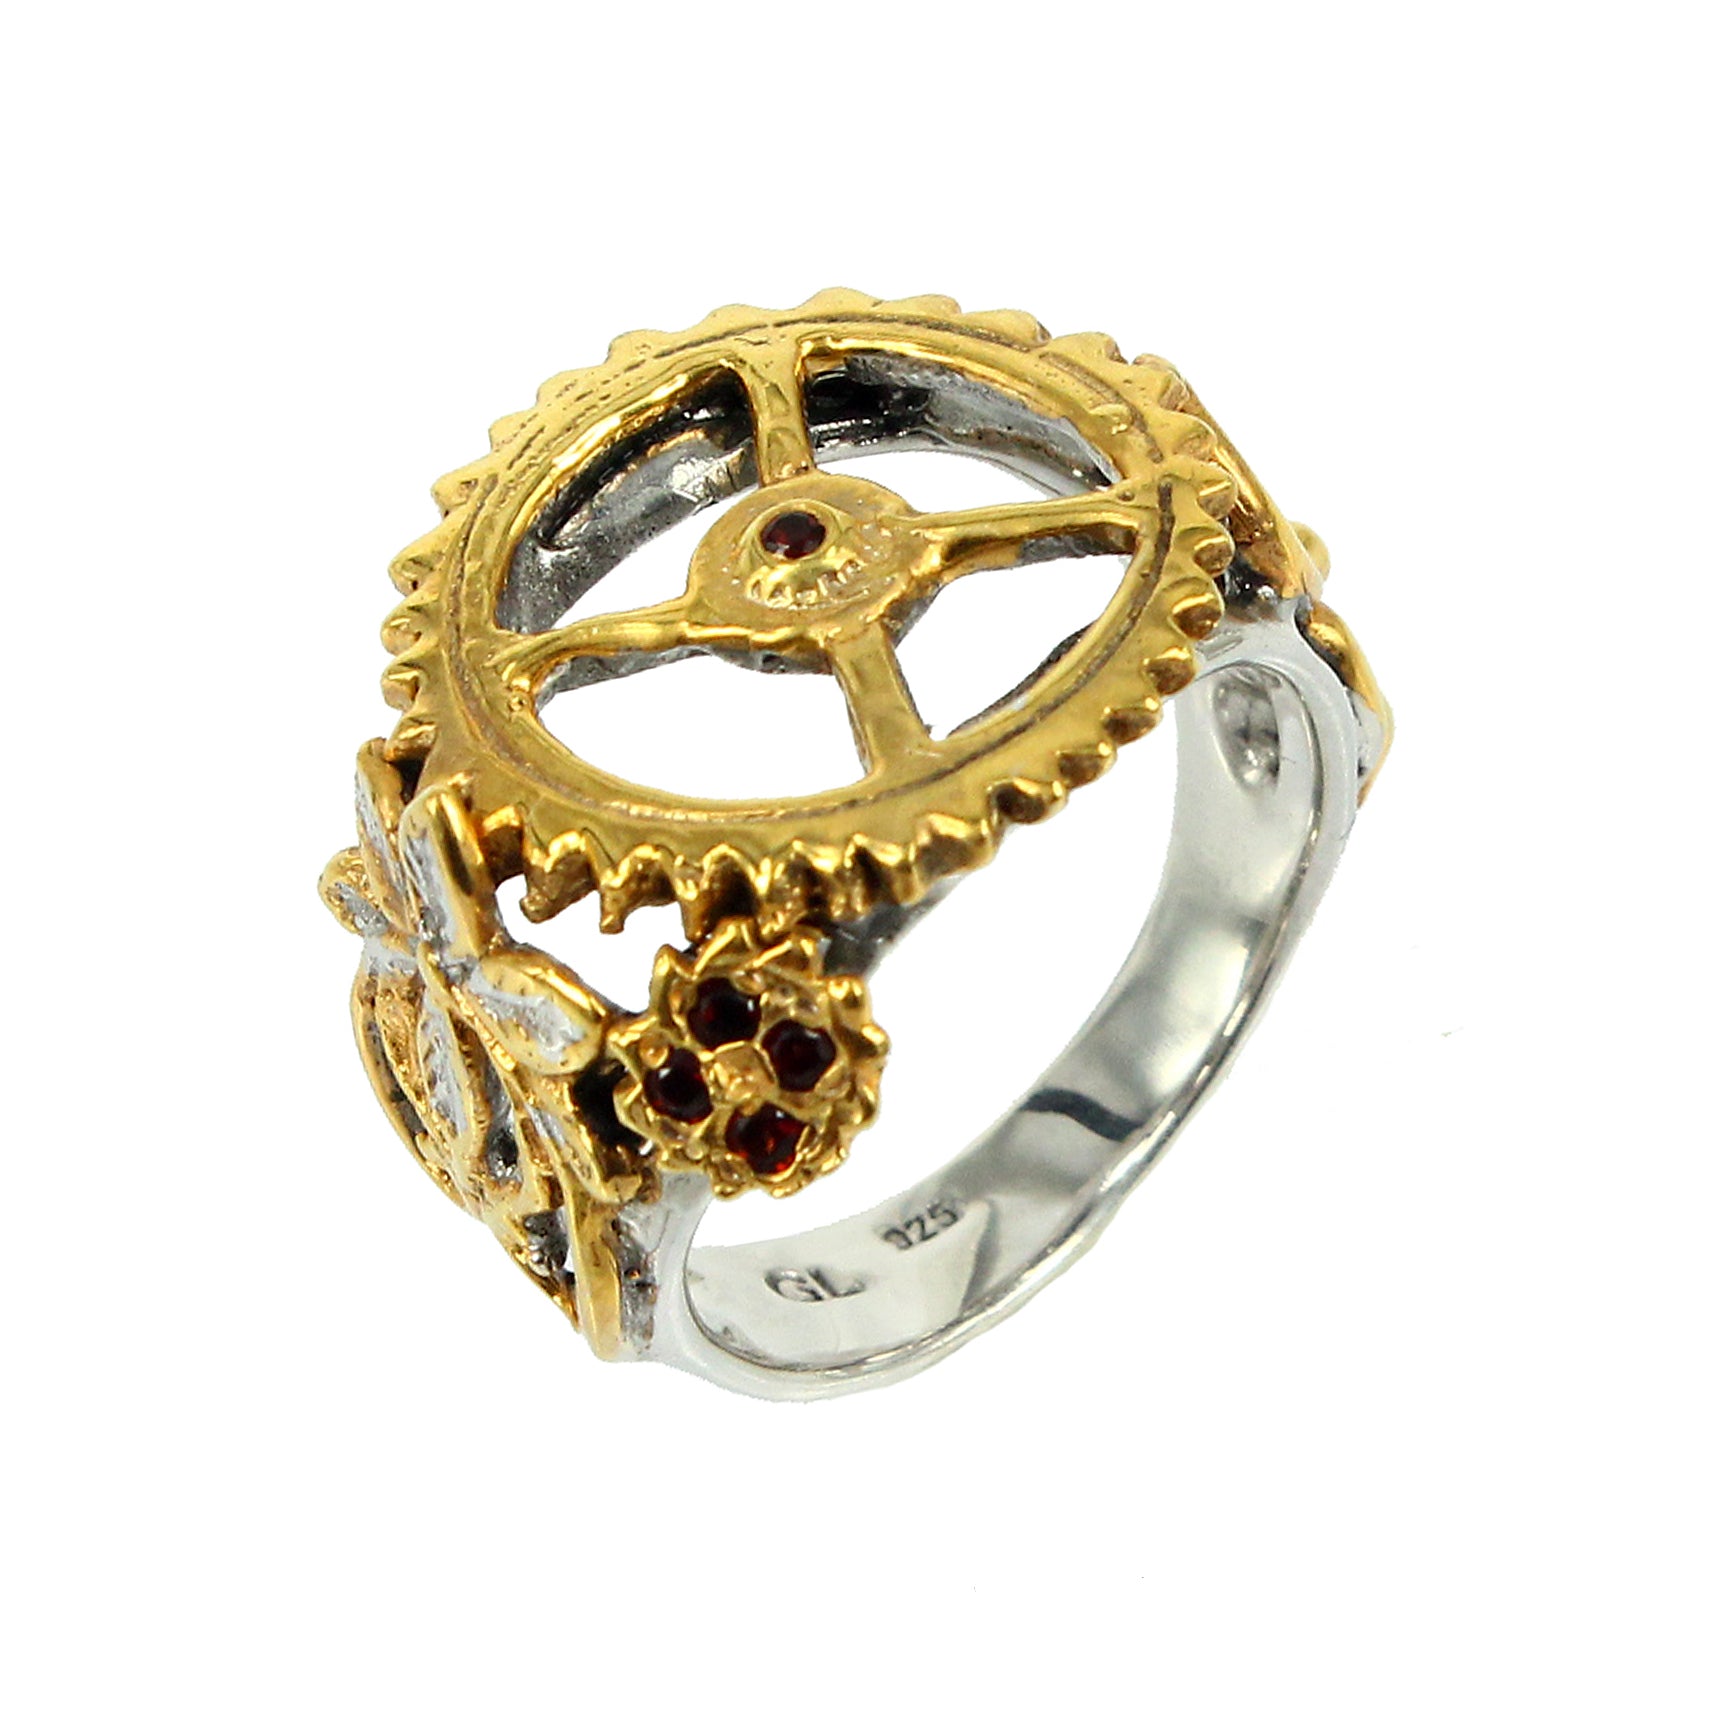 SteamPunk - 925 Sterling Silver Ring, Decorated with Garnets, Plated with 3 Micron 22K Yellow Gold and White Rhodium